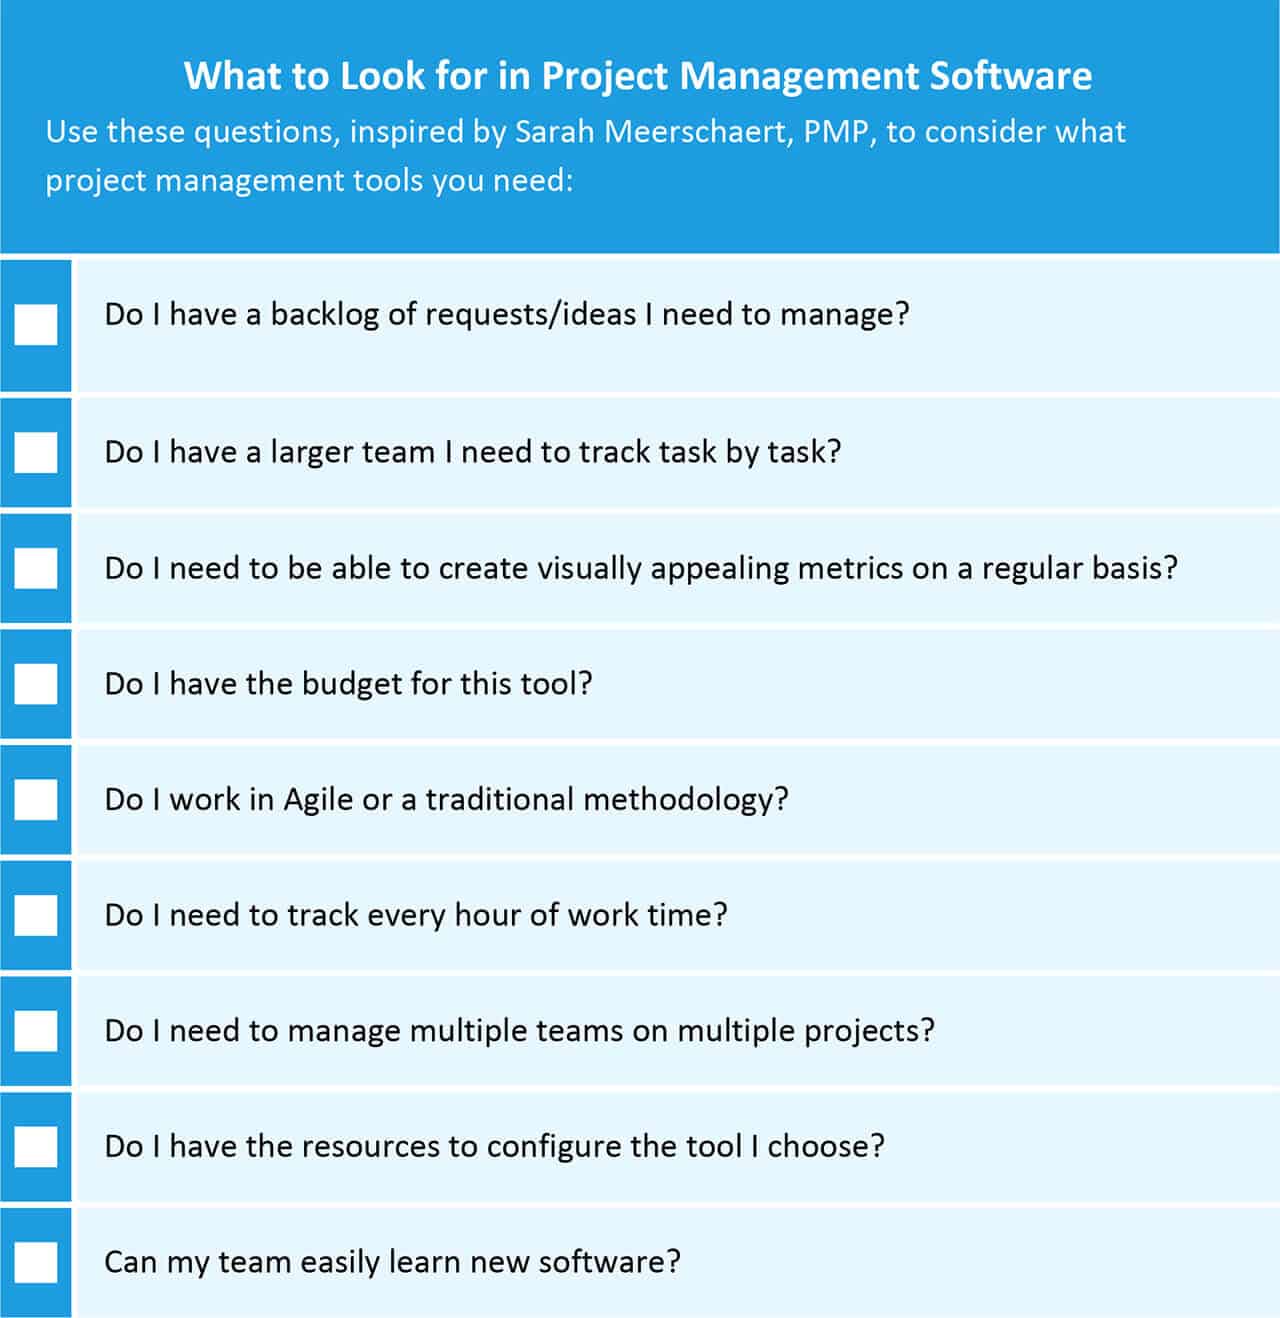 What to Look for in Project Management Software